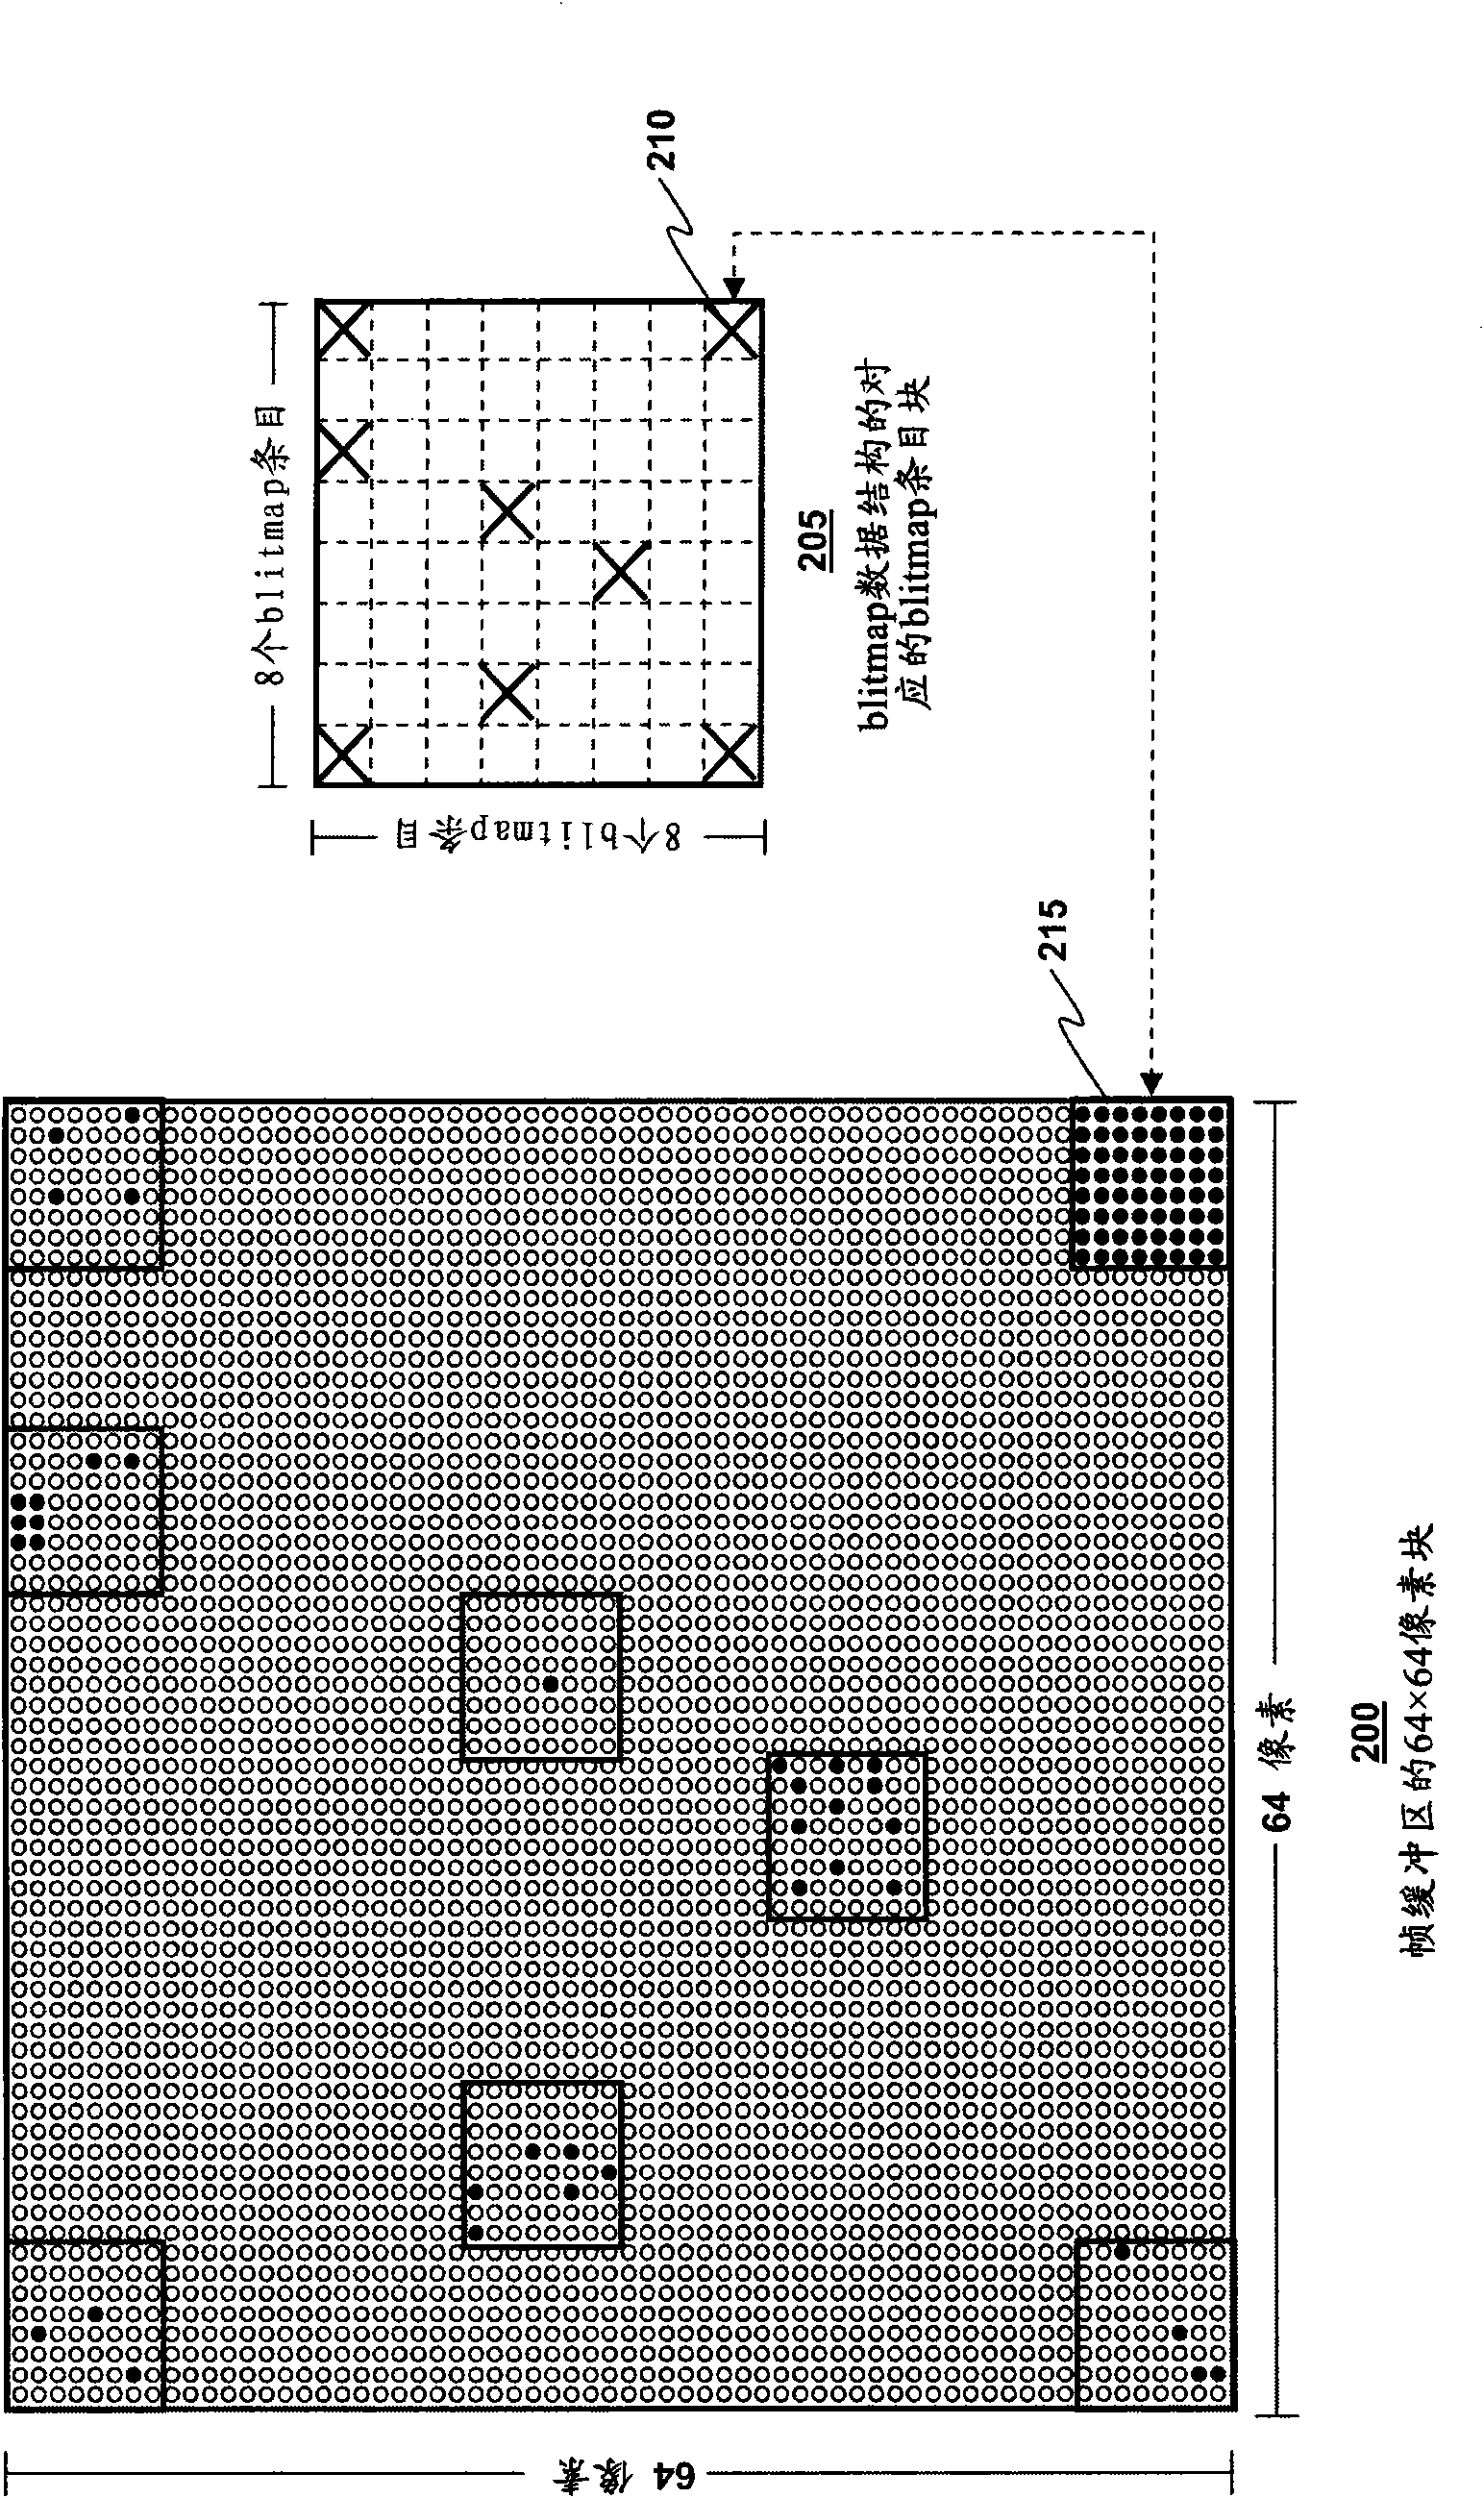 Method and system for copying a framebuffer for transmission to a remote display